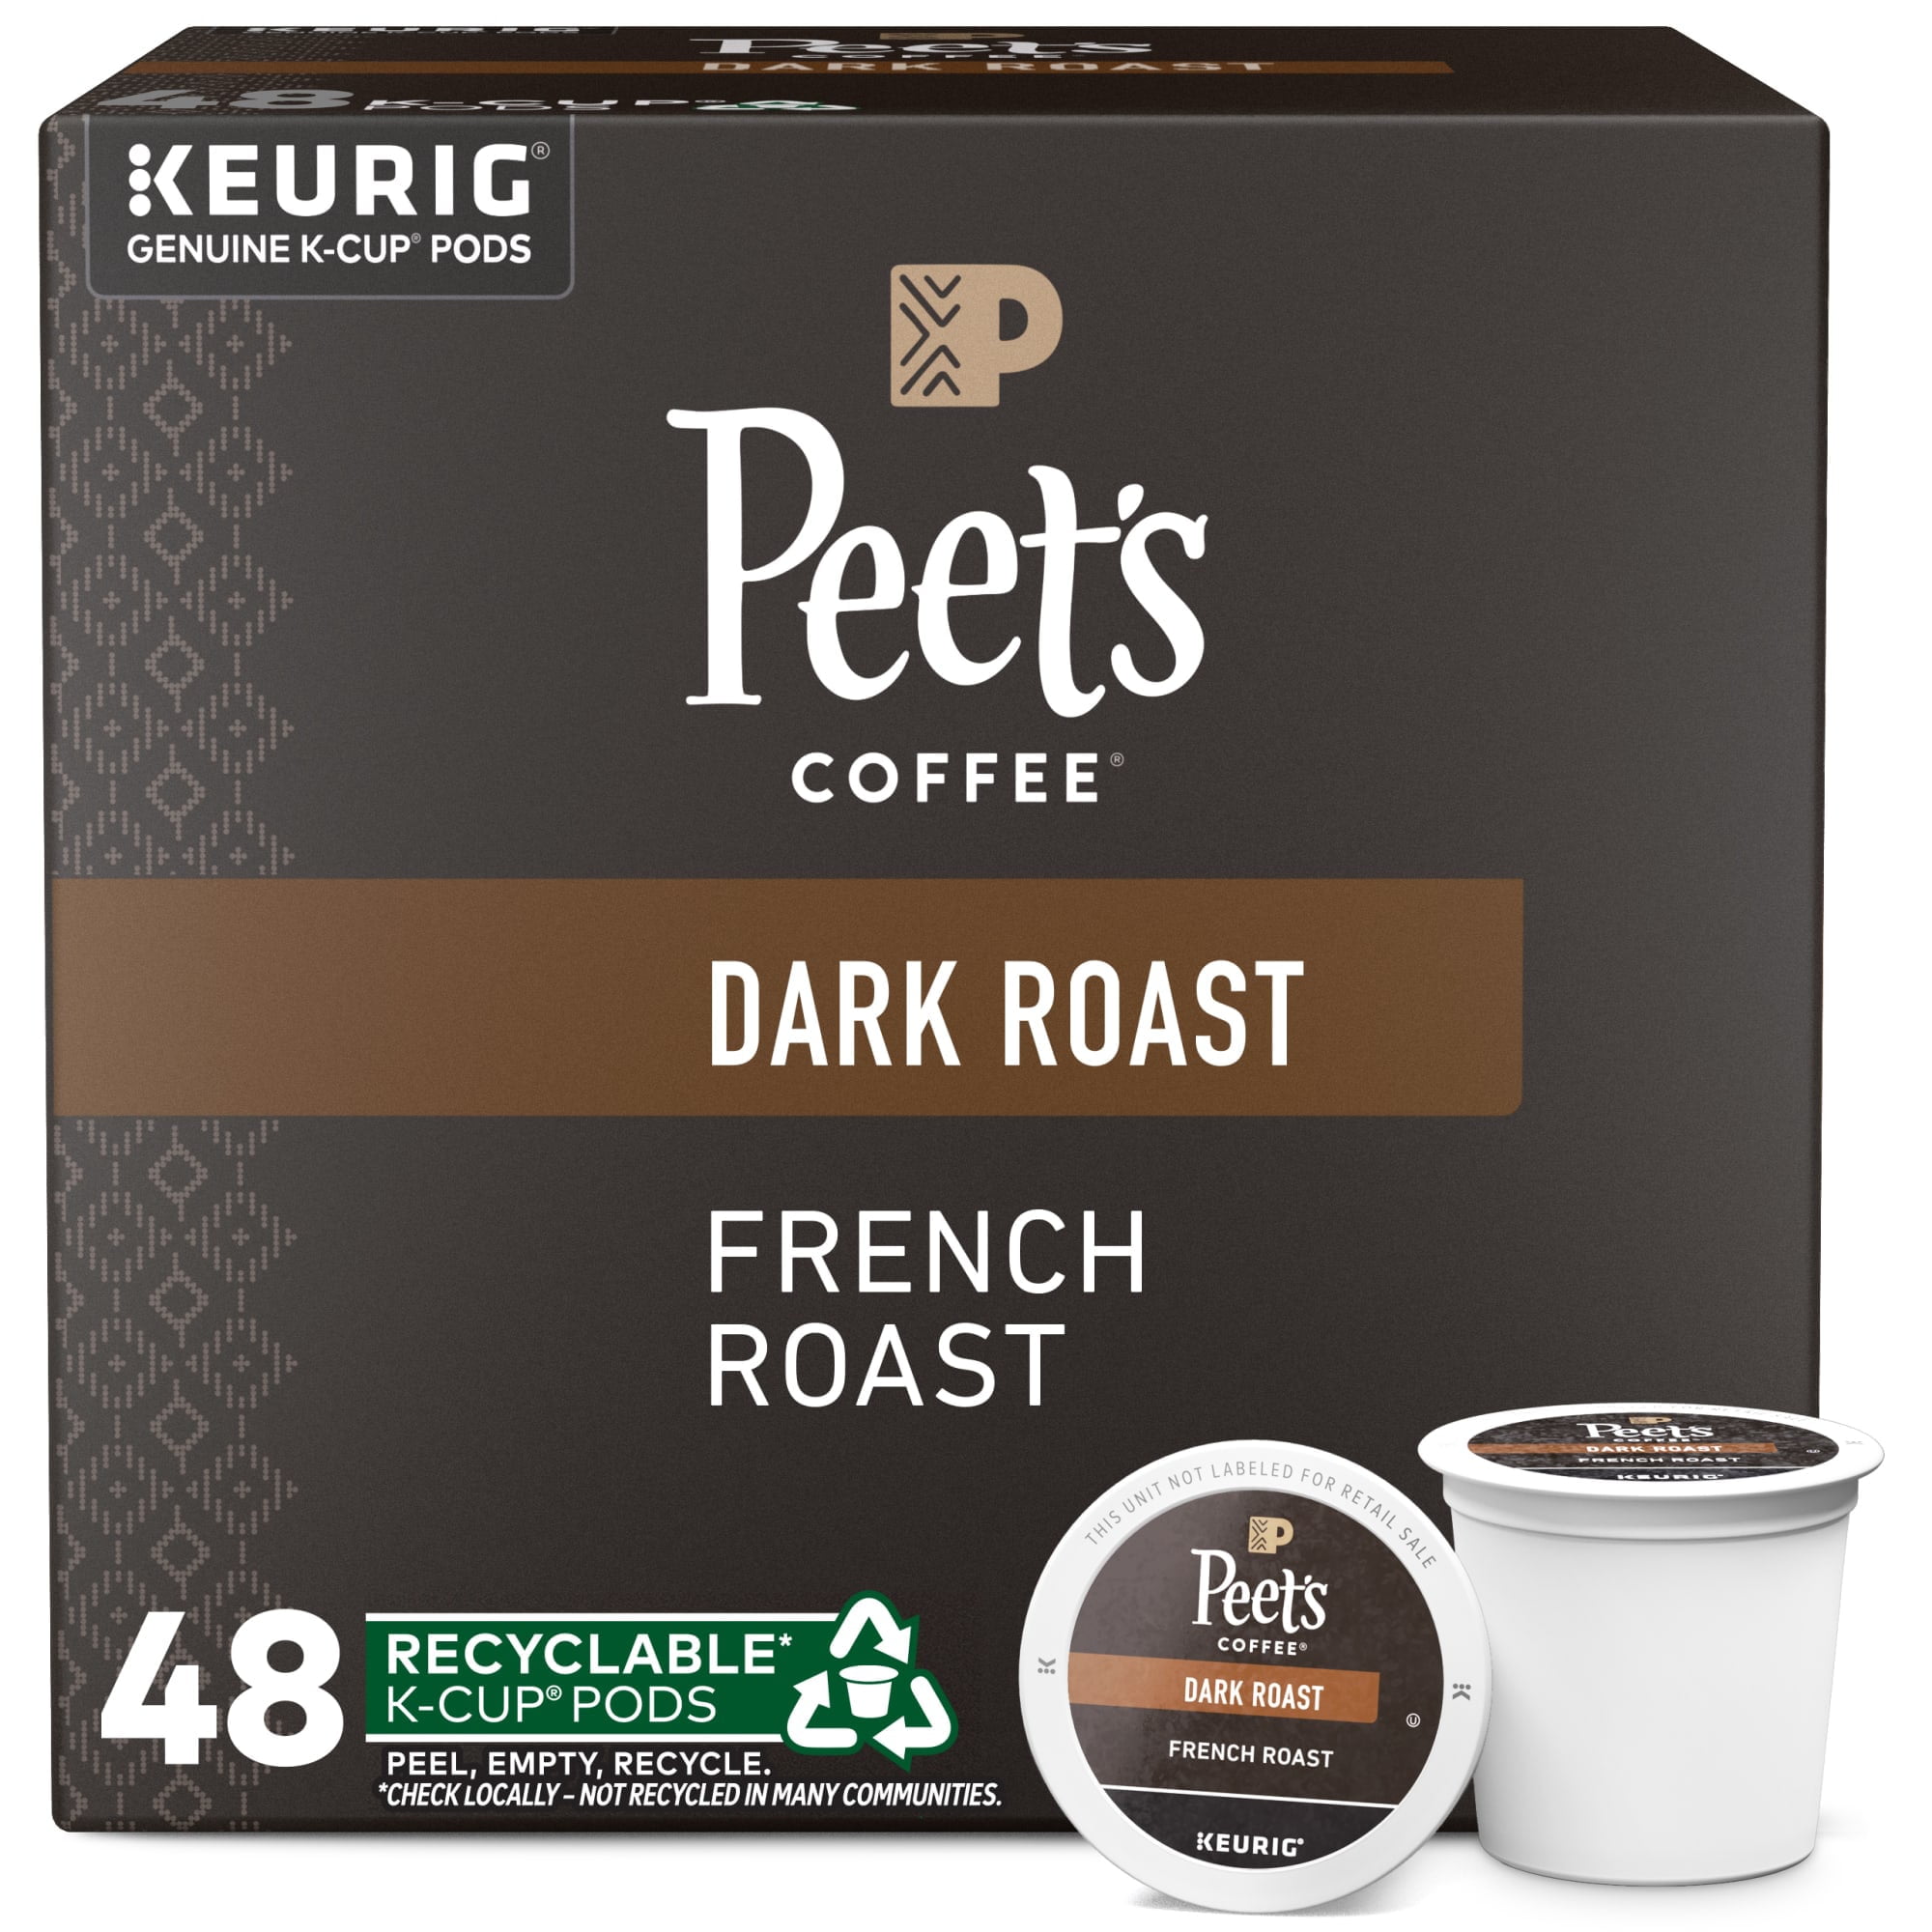 Barista Prima French Roast Coffee Keurig K-Cups, 24 Count – COFFEE-19